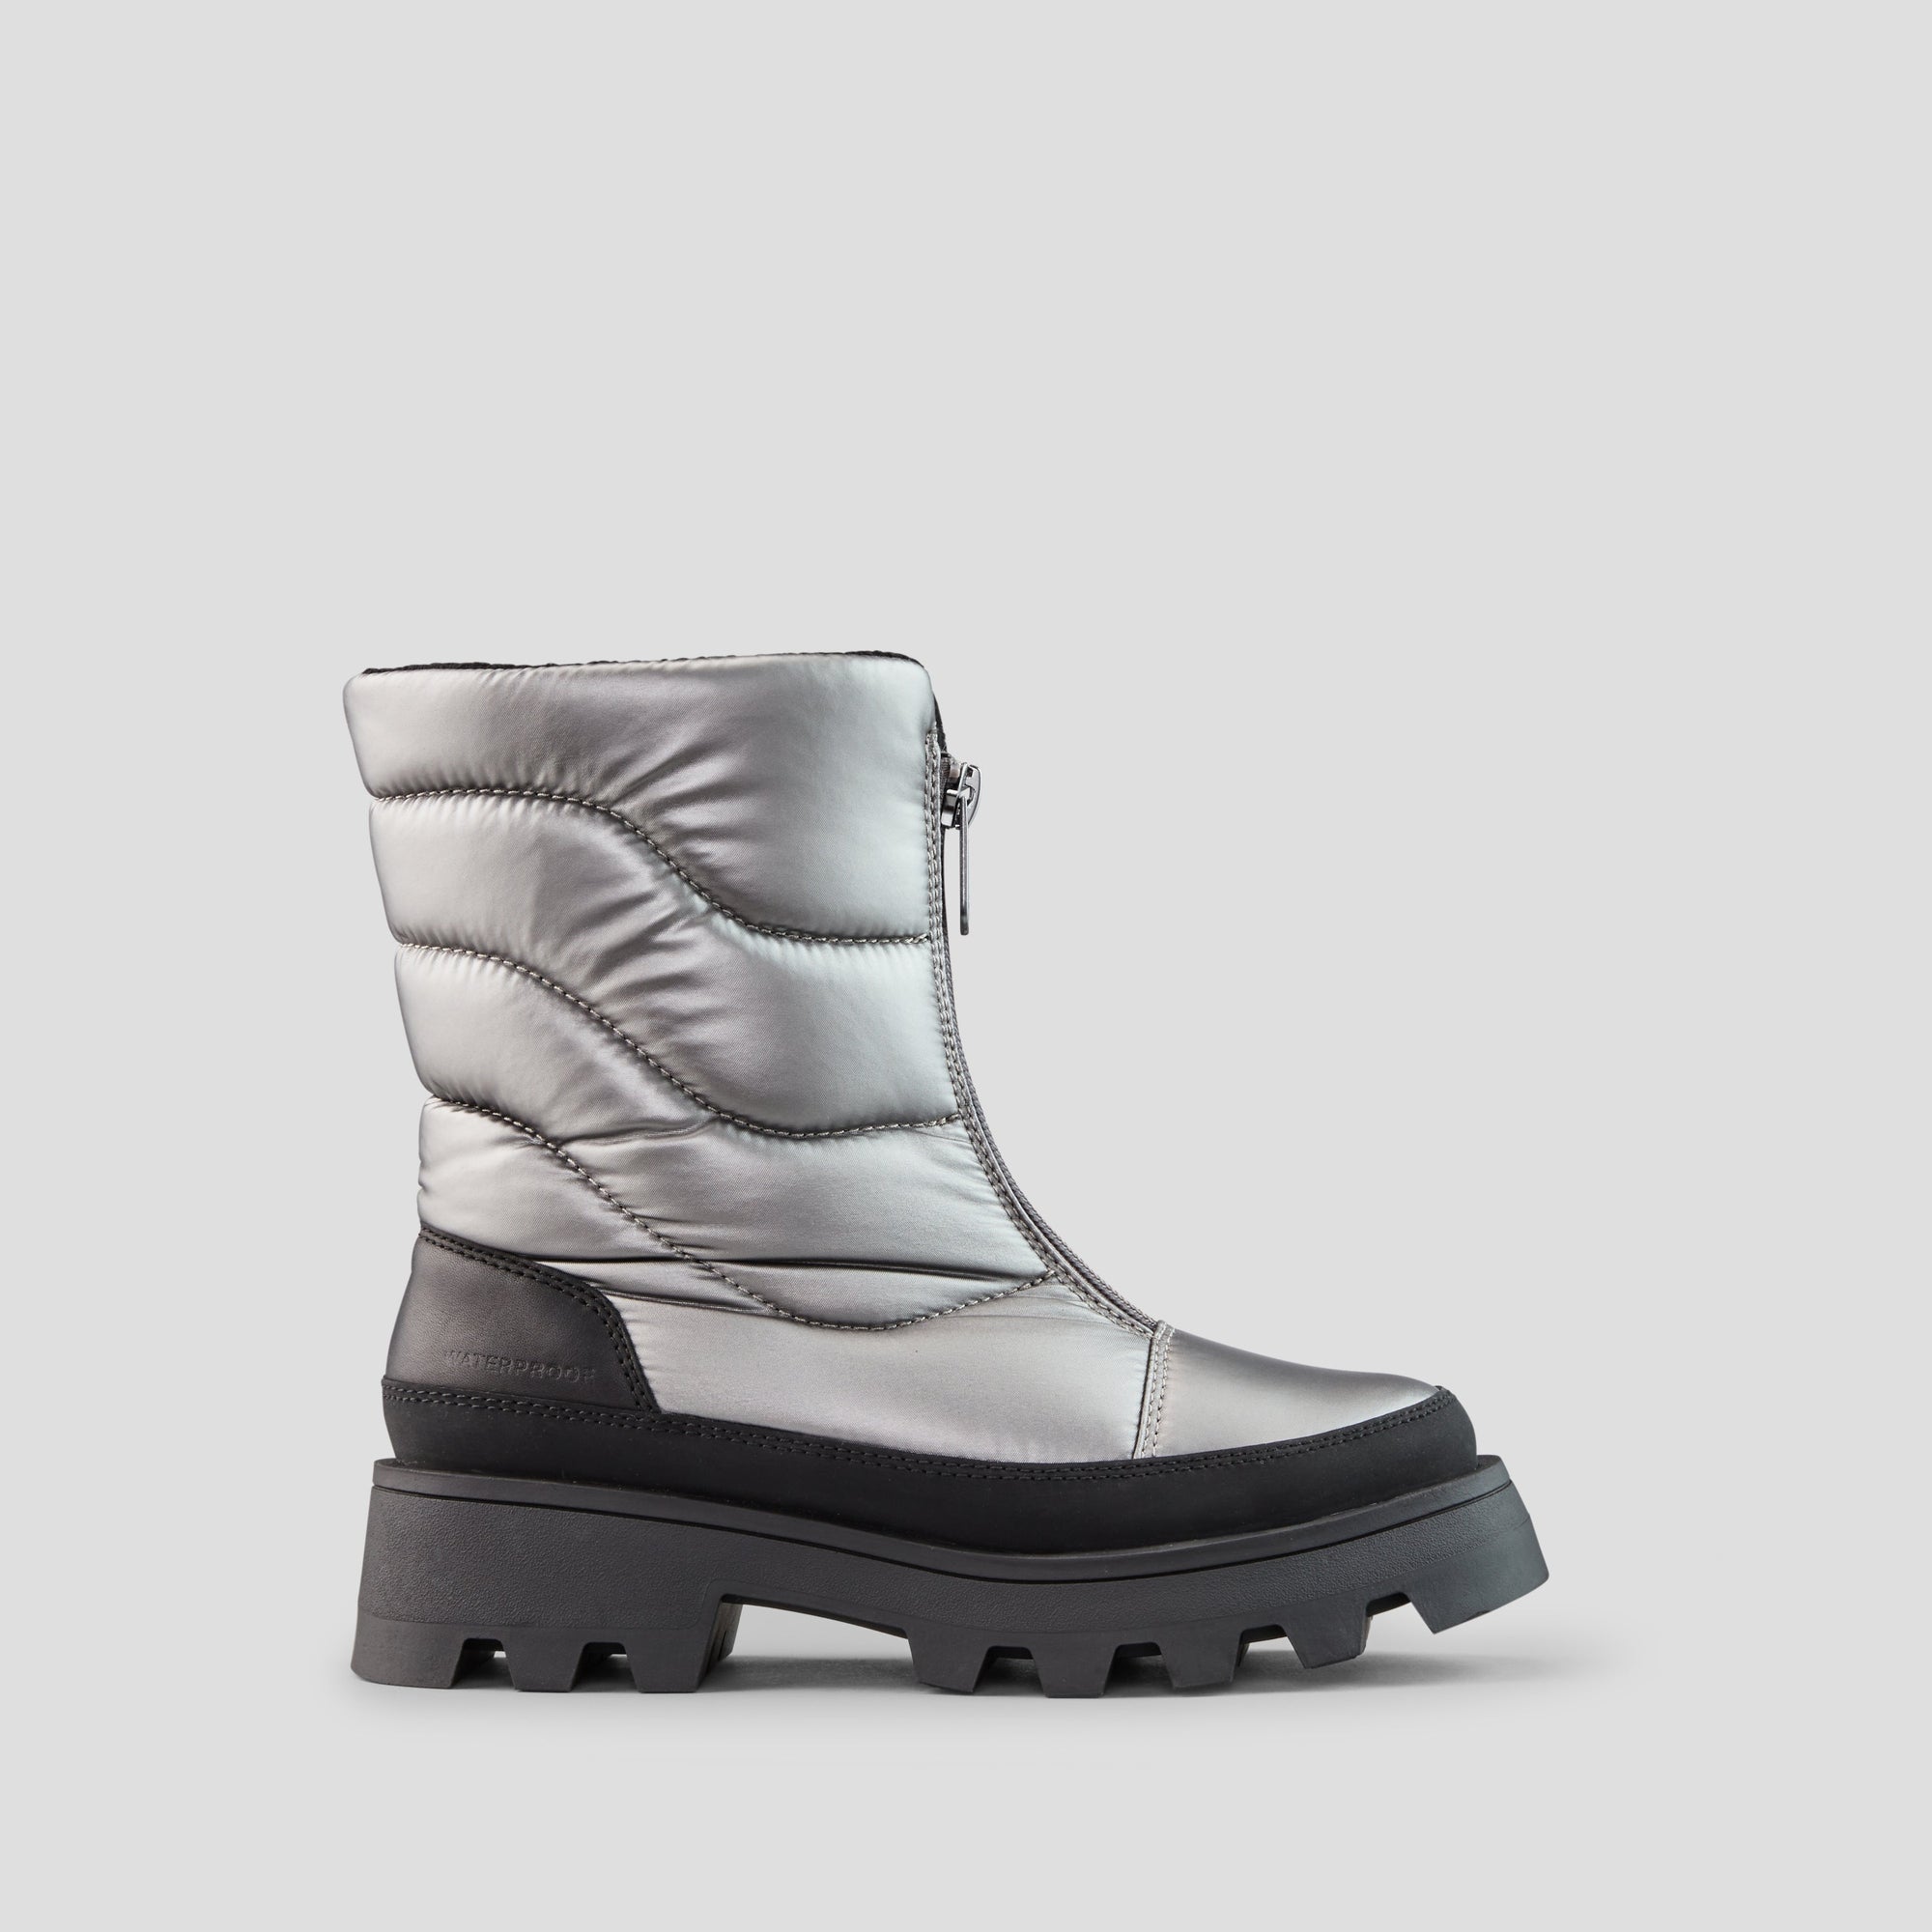 Savvy Nylon Waterproof Boot with PrimaLoft® - Colour Pewter